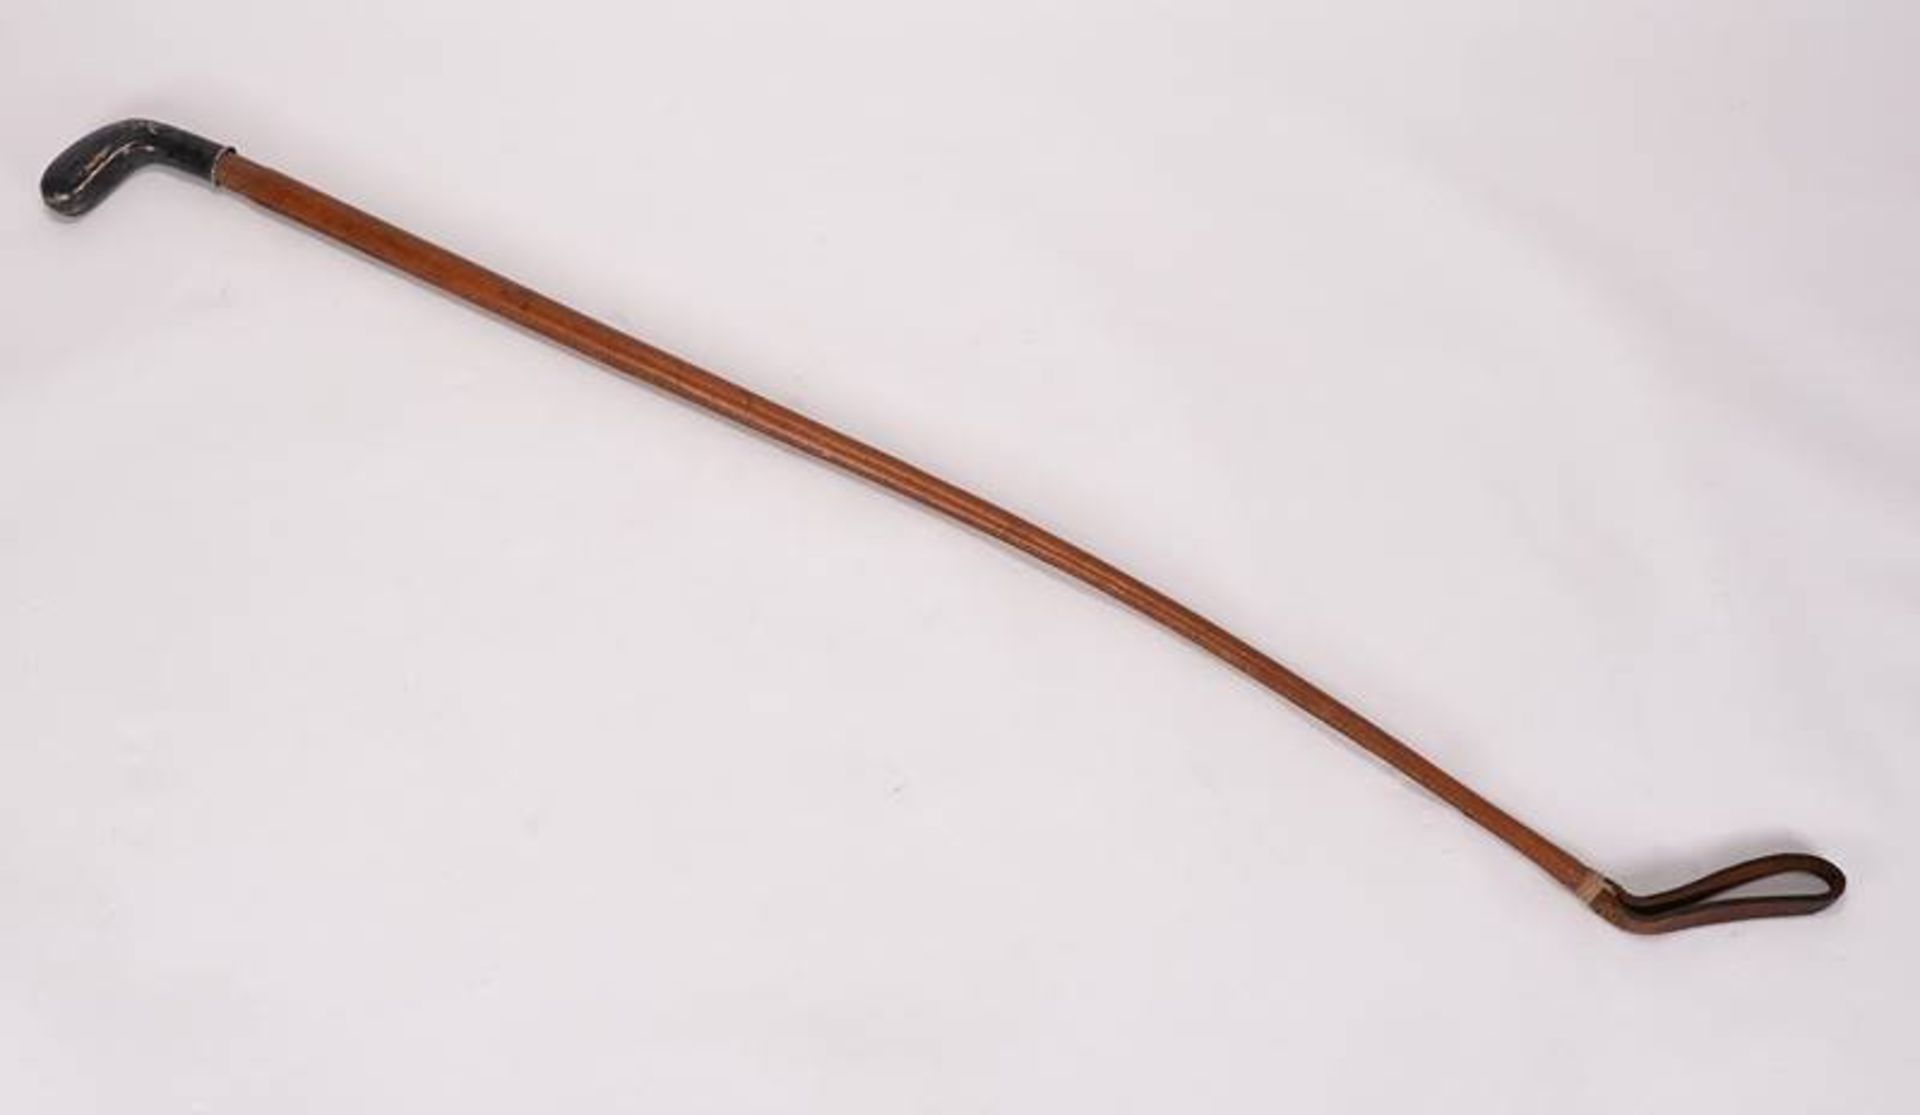 Riding crop with silver pommel - Image 2 of 3